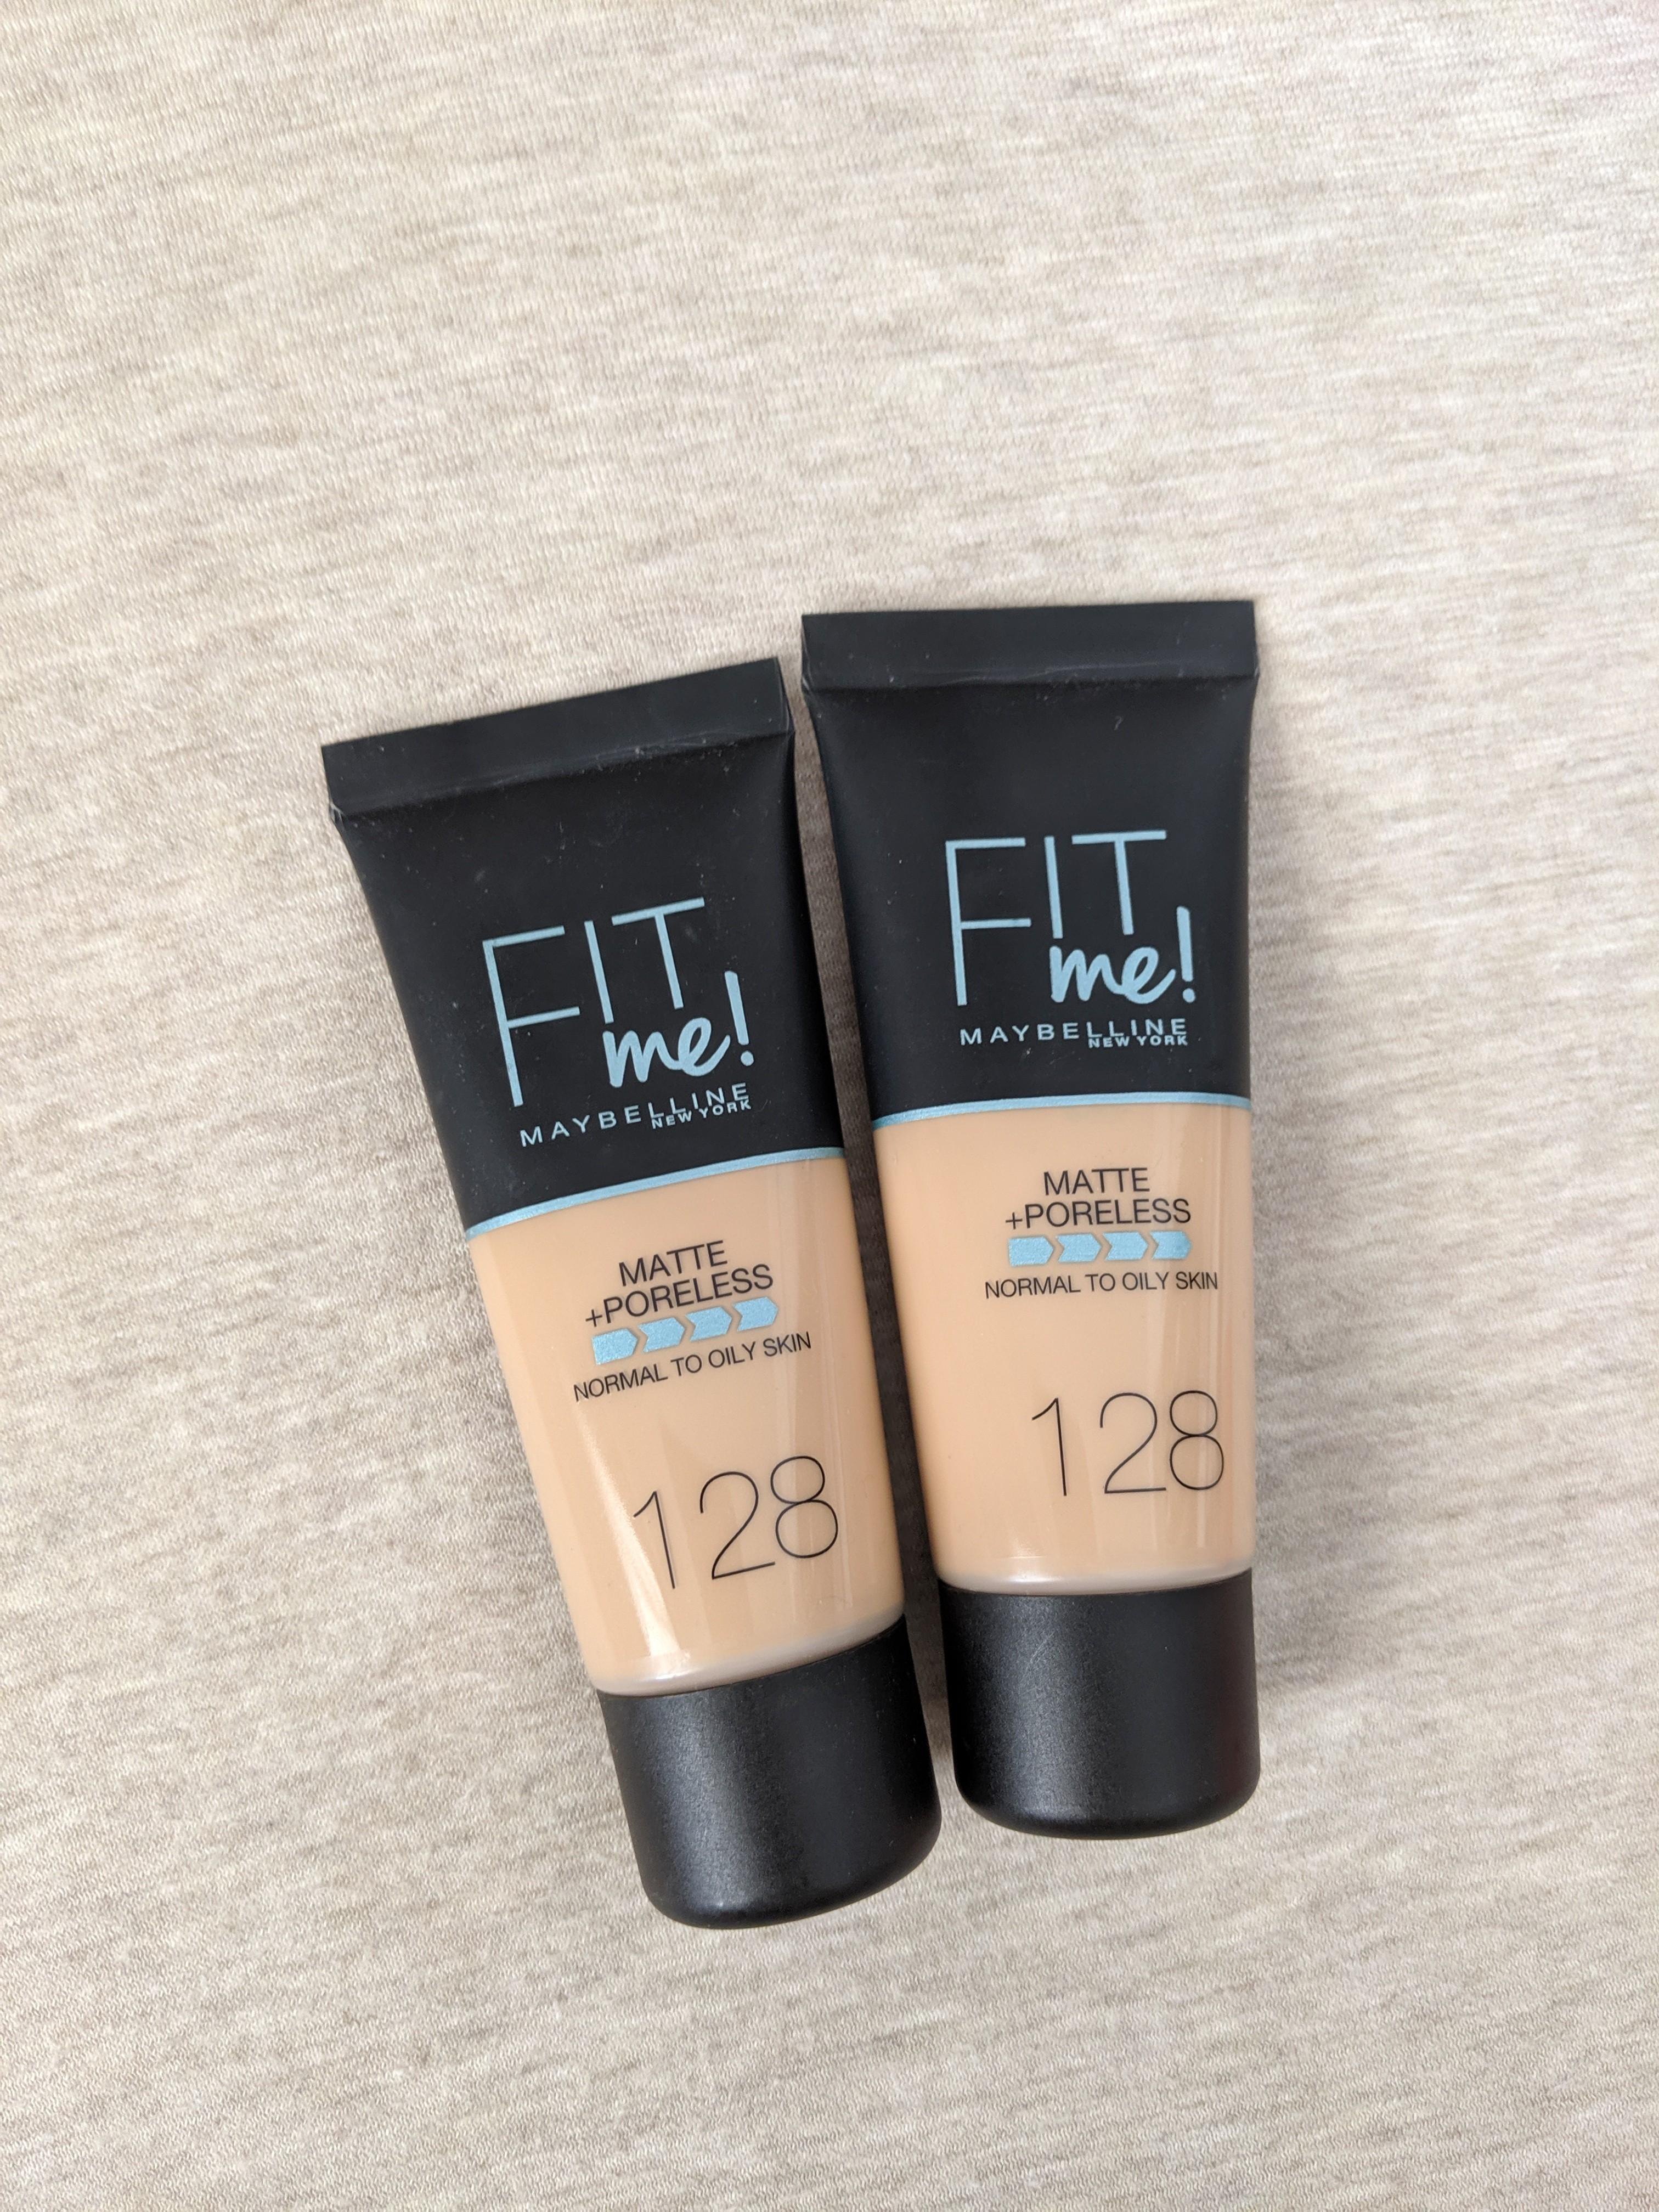 Fit me! Maybelline New York Makeup Carousell Poreless Face, 128, Matte on Personal & Shade Beauty Care, Foundation